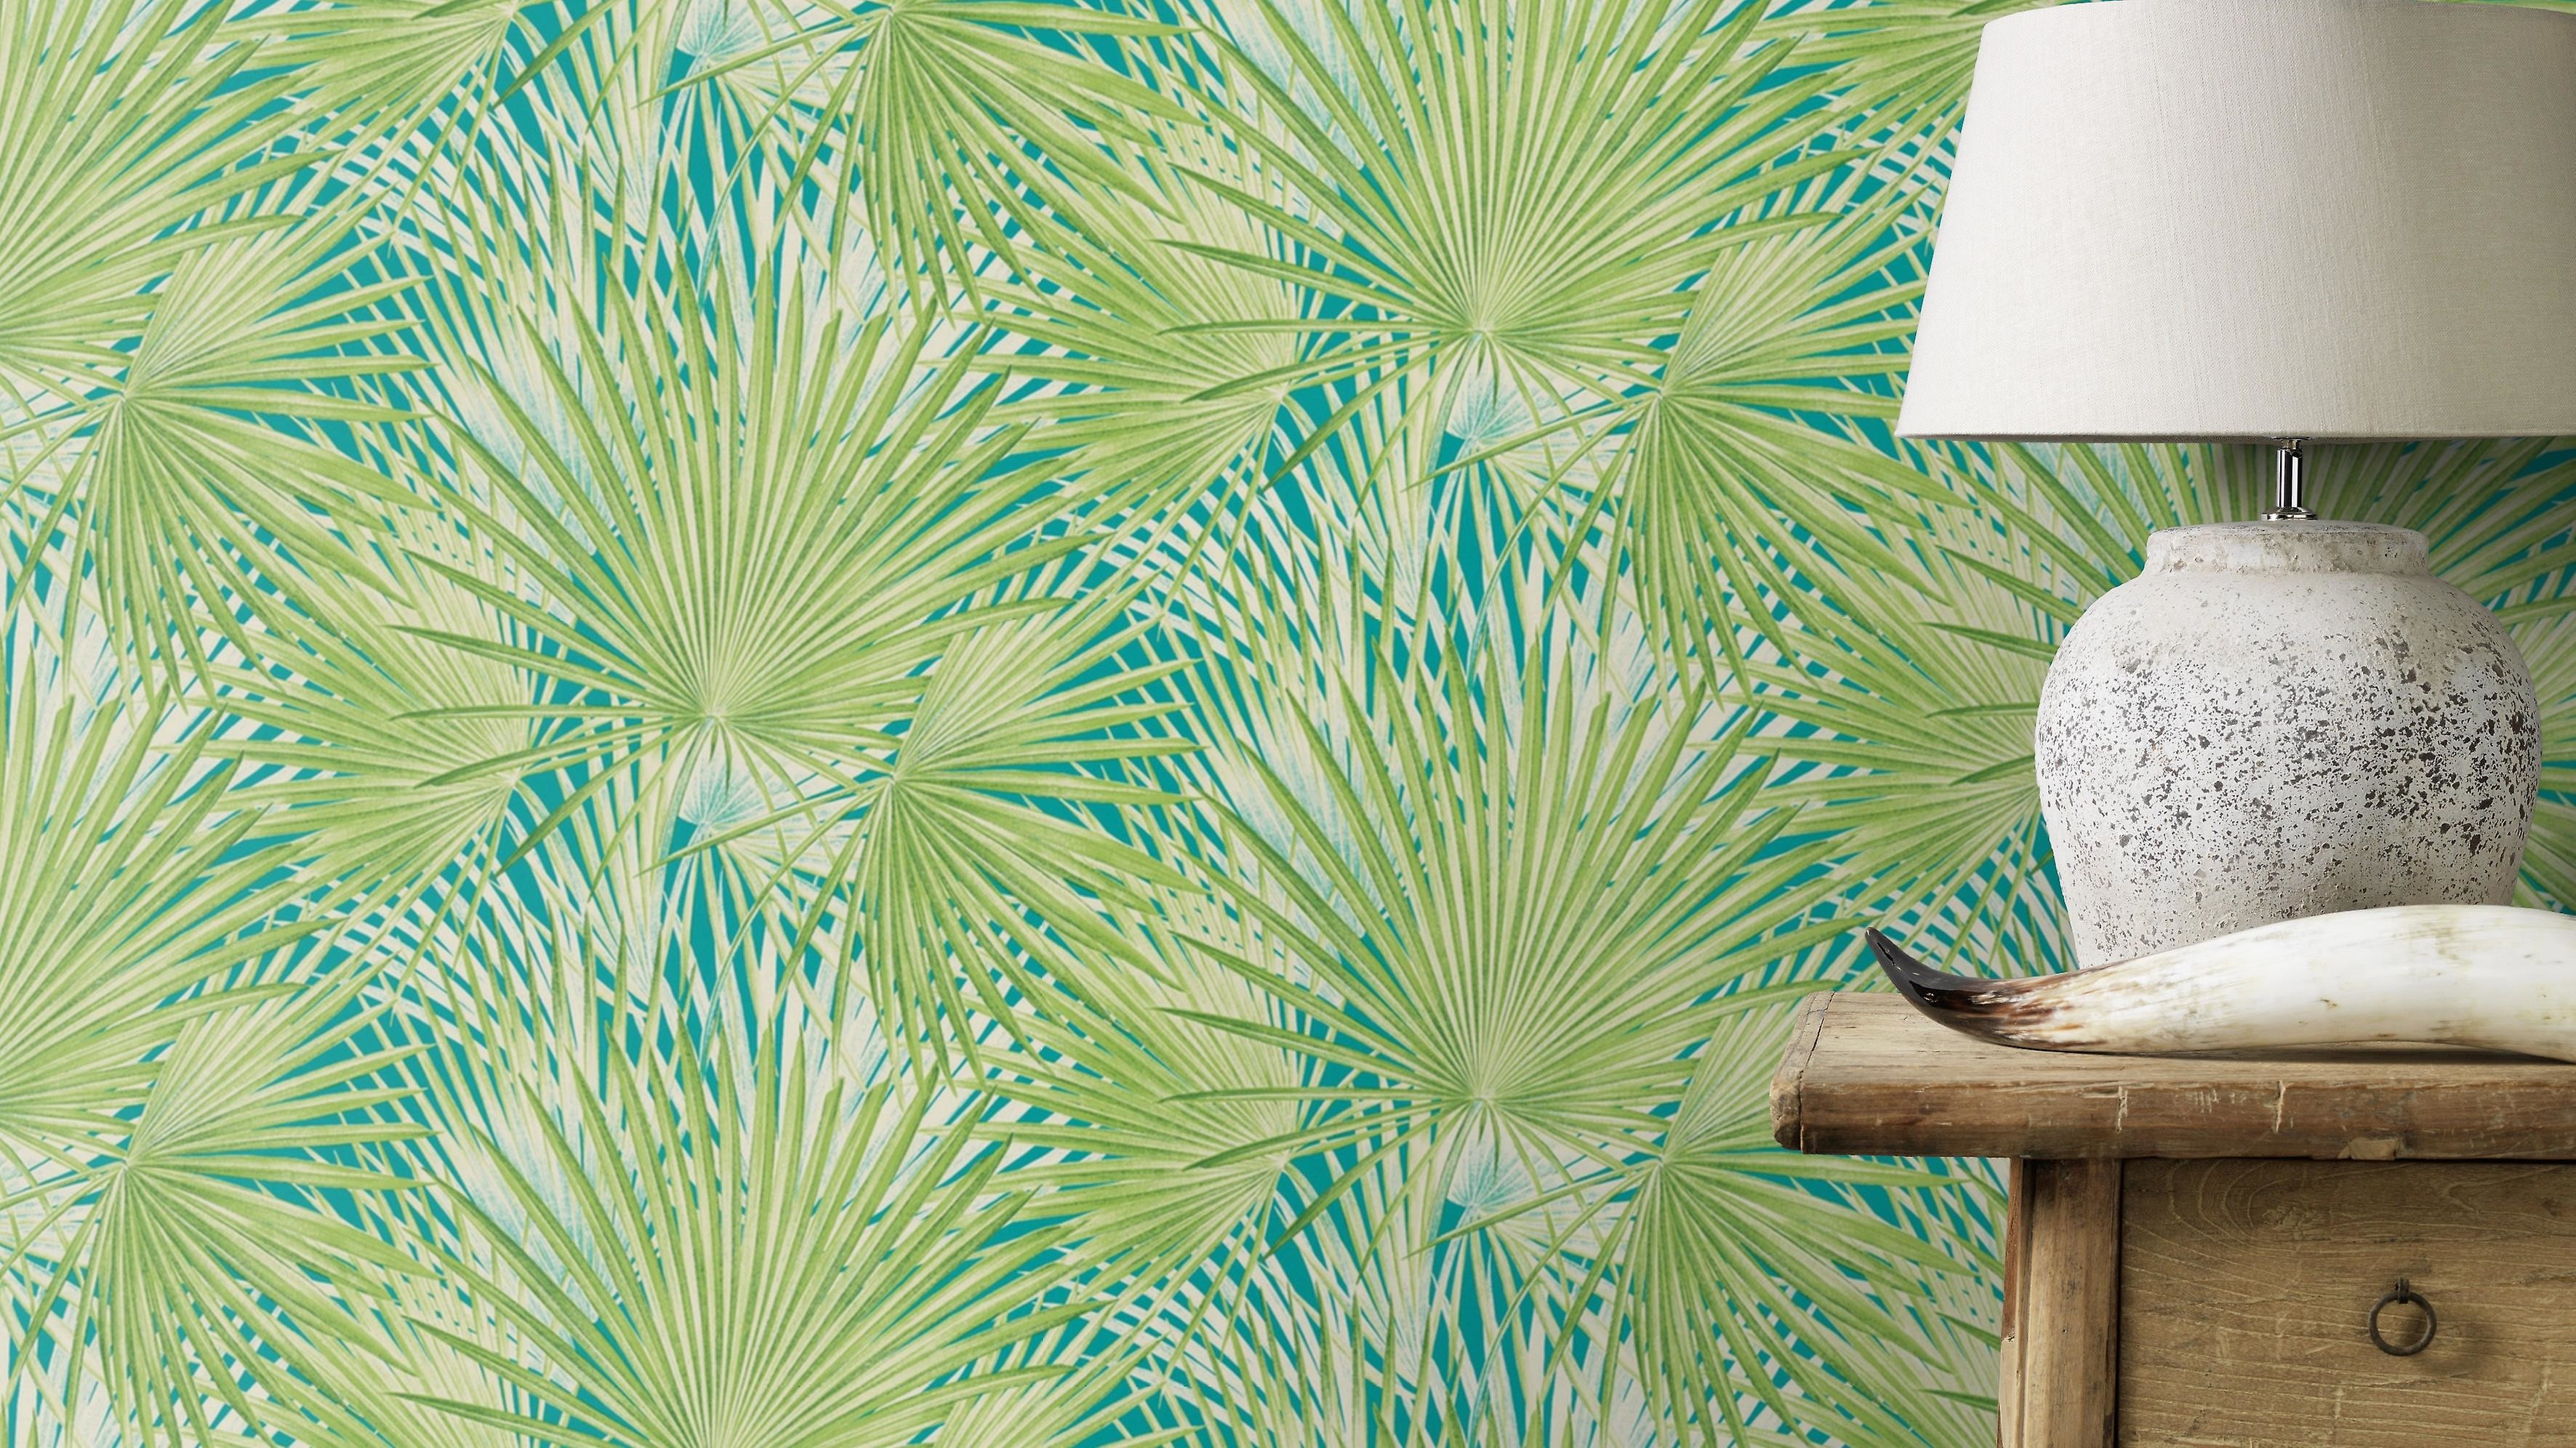 3543x1992 Tropical Palm Tree Wallpaper Exotic Print Smooth Vinyl Green & Teal Floral  Rasch